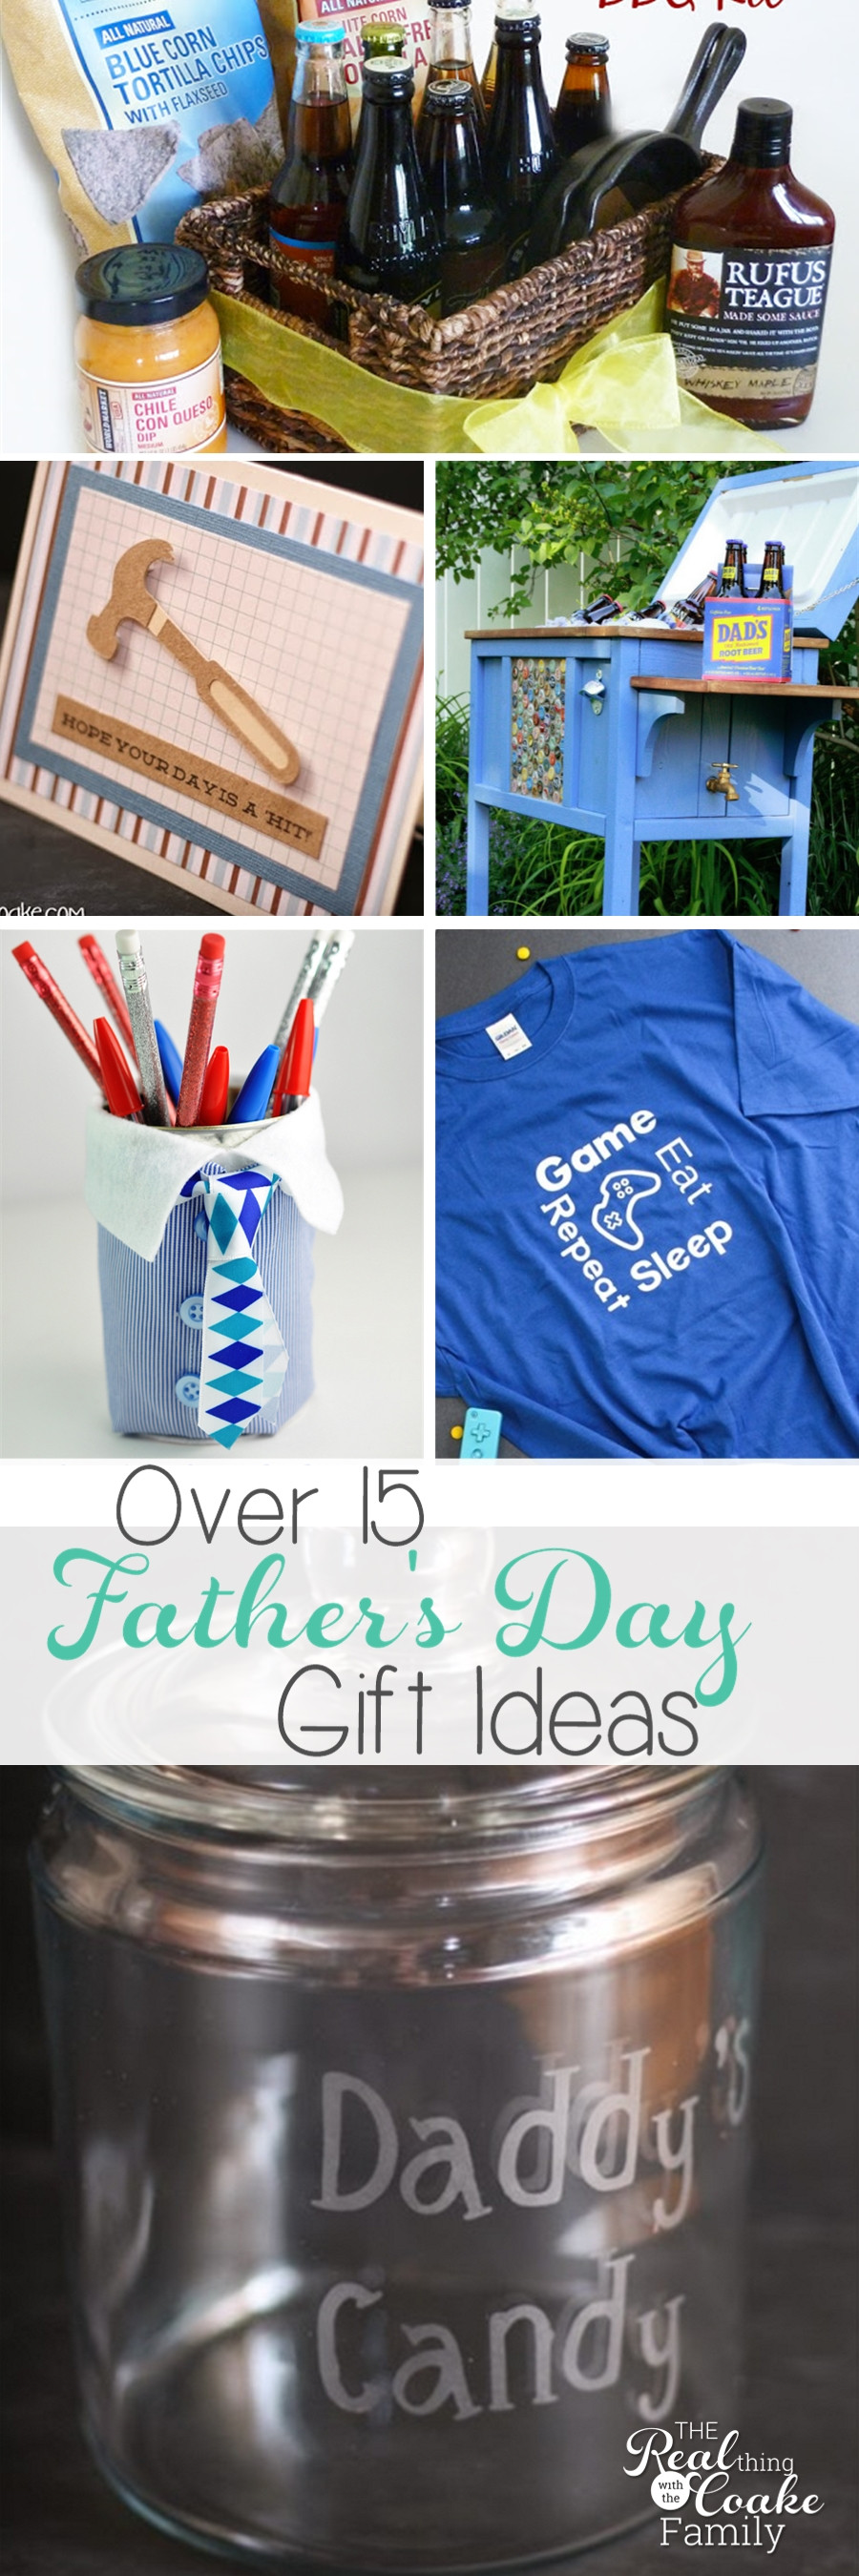 Great Father'S Day Gift Ideas
 Over 15 Great Father’s Day Gift Ideas The Real Thing